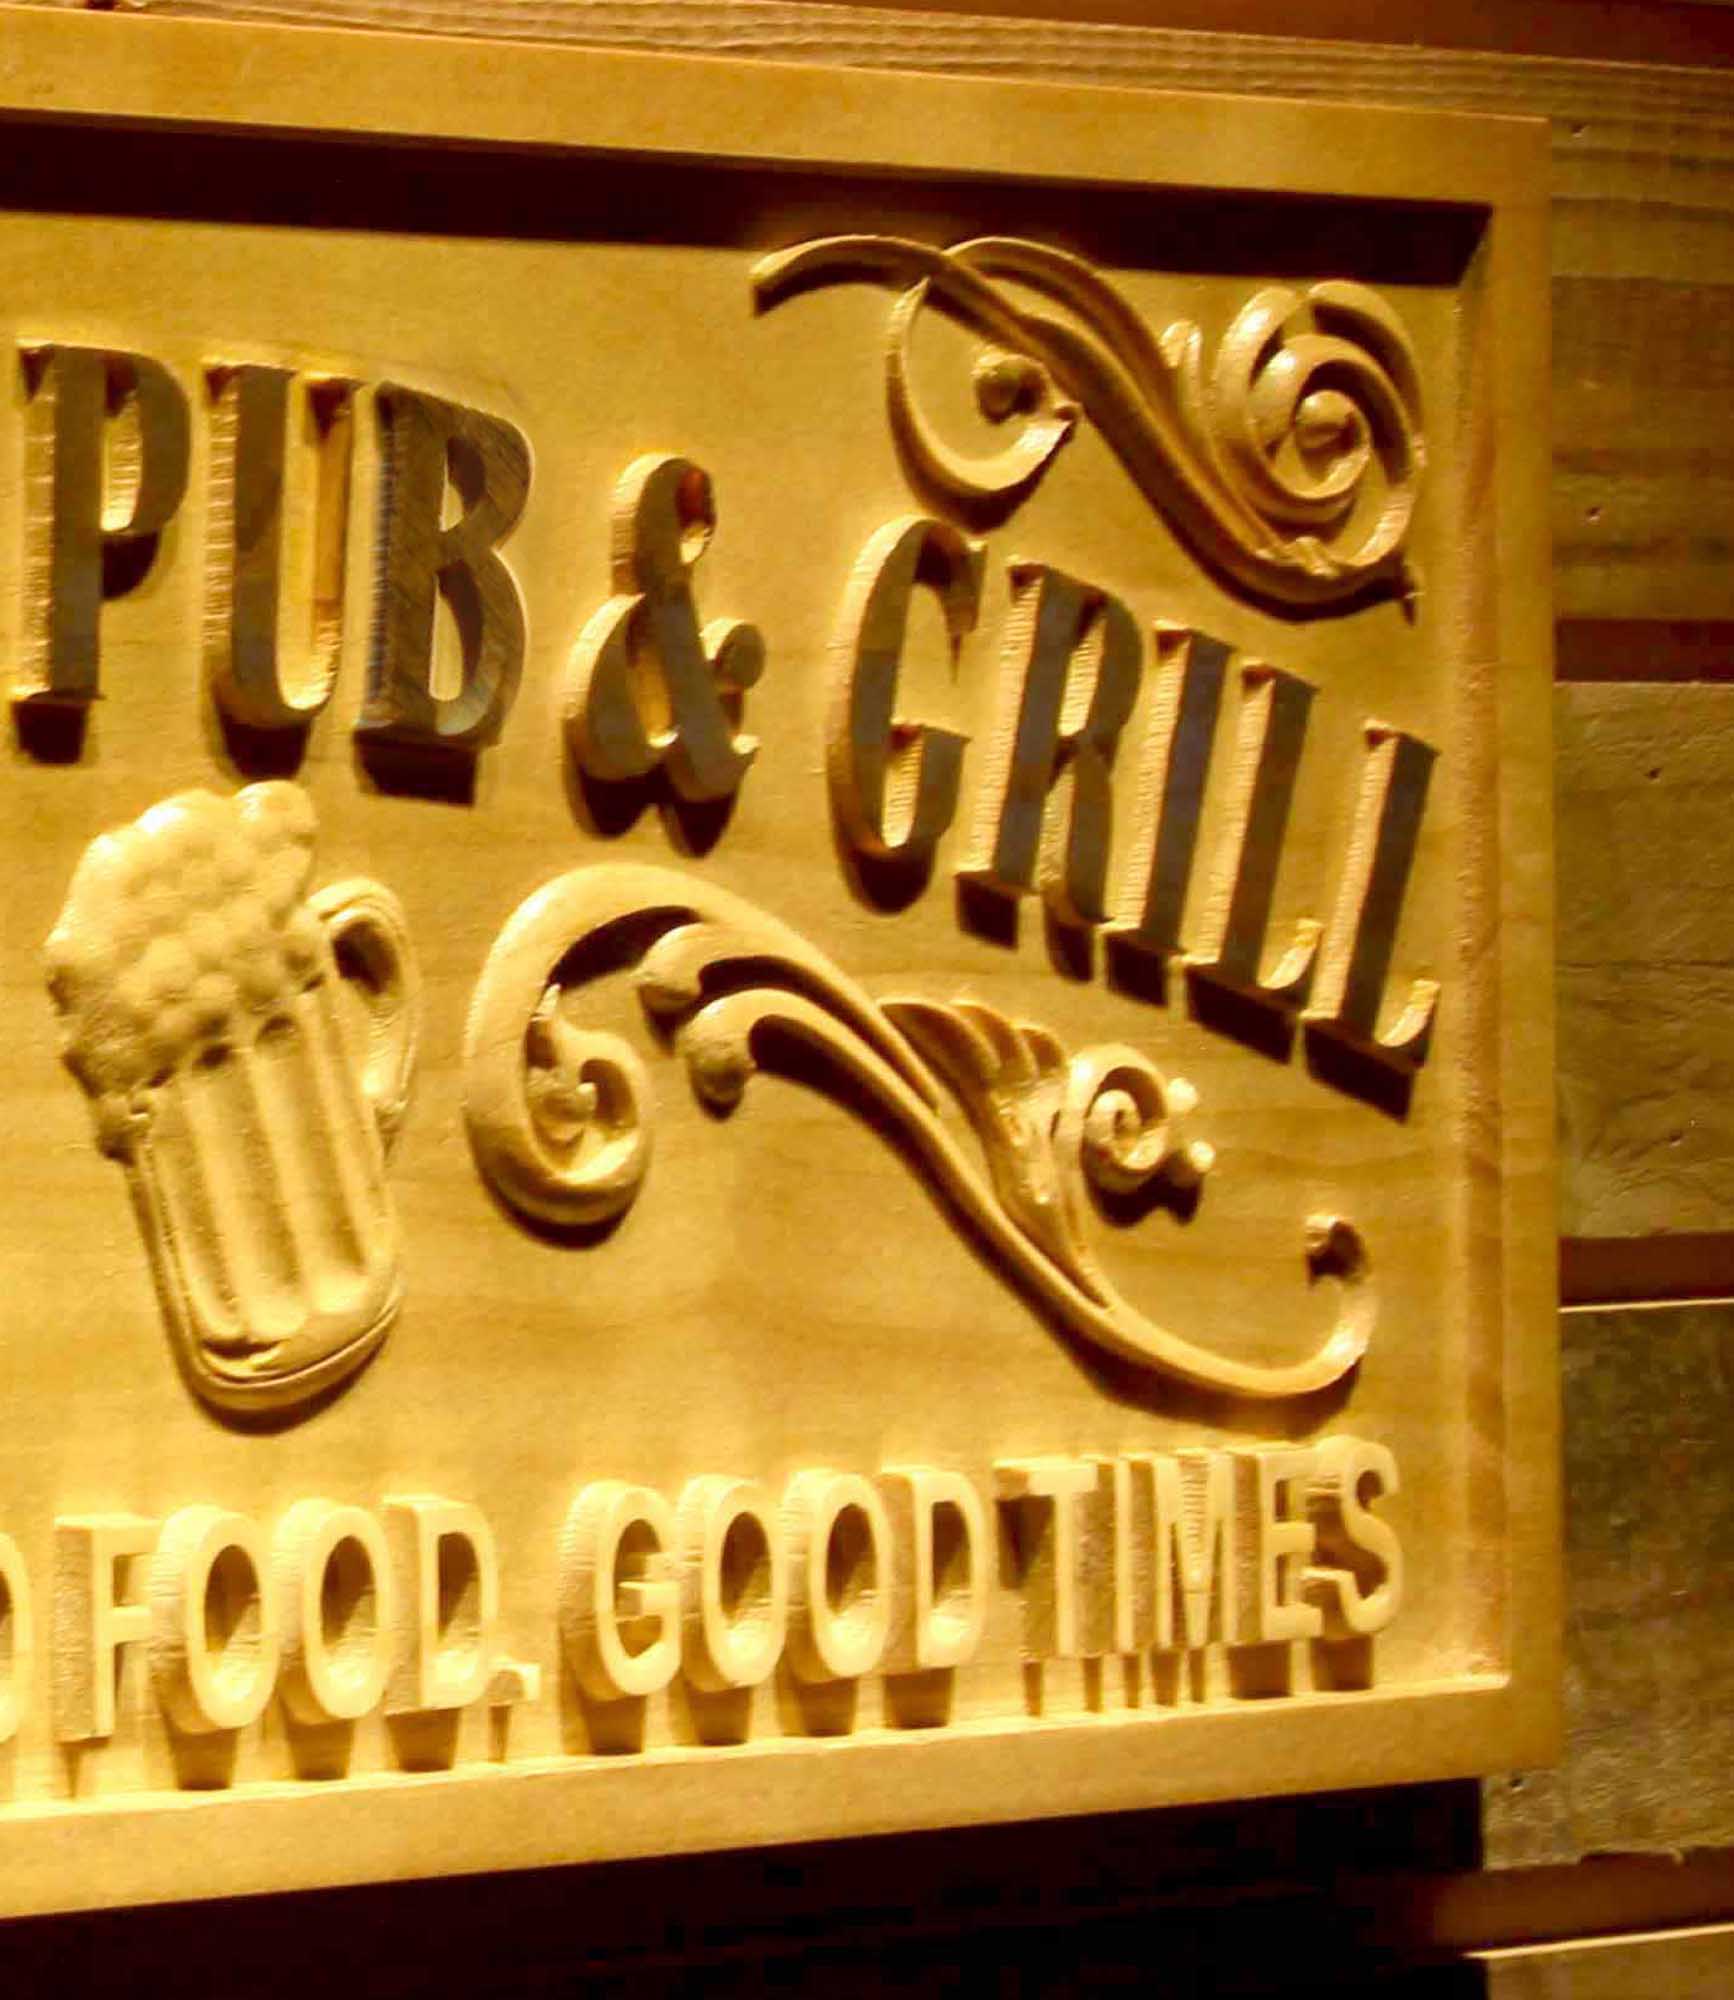 Personalized Pub & Grill Home Bar Gifts Wood Engraved Wooden Sign